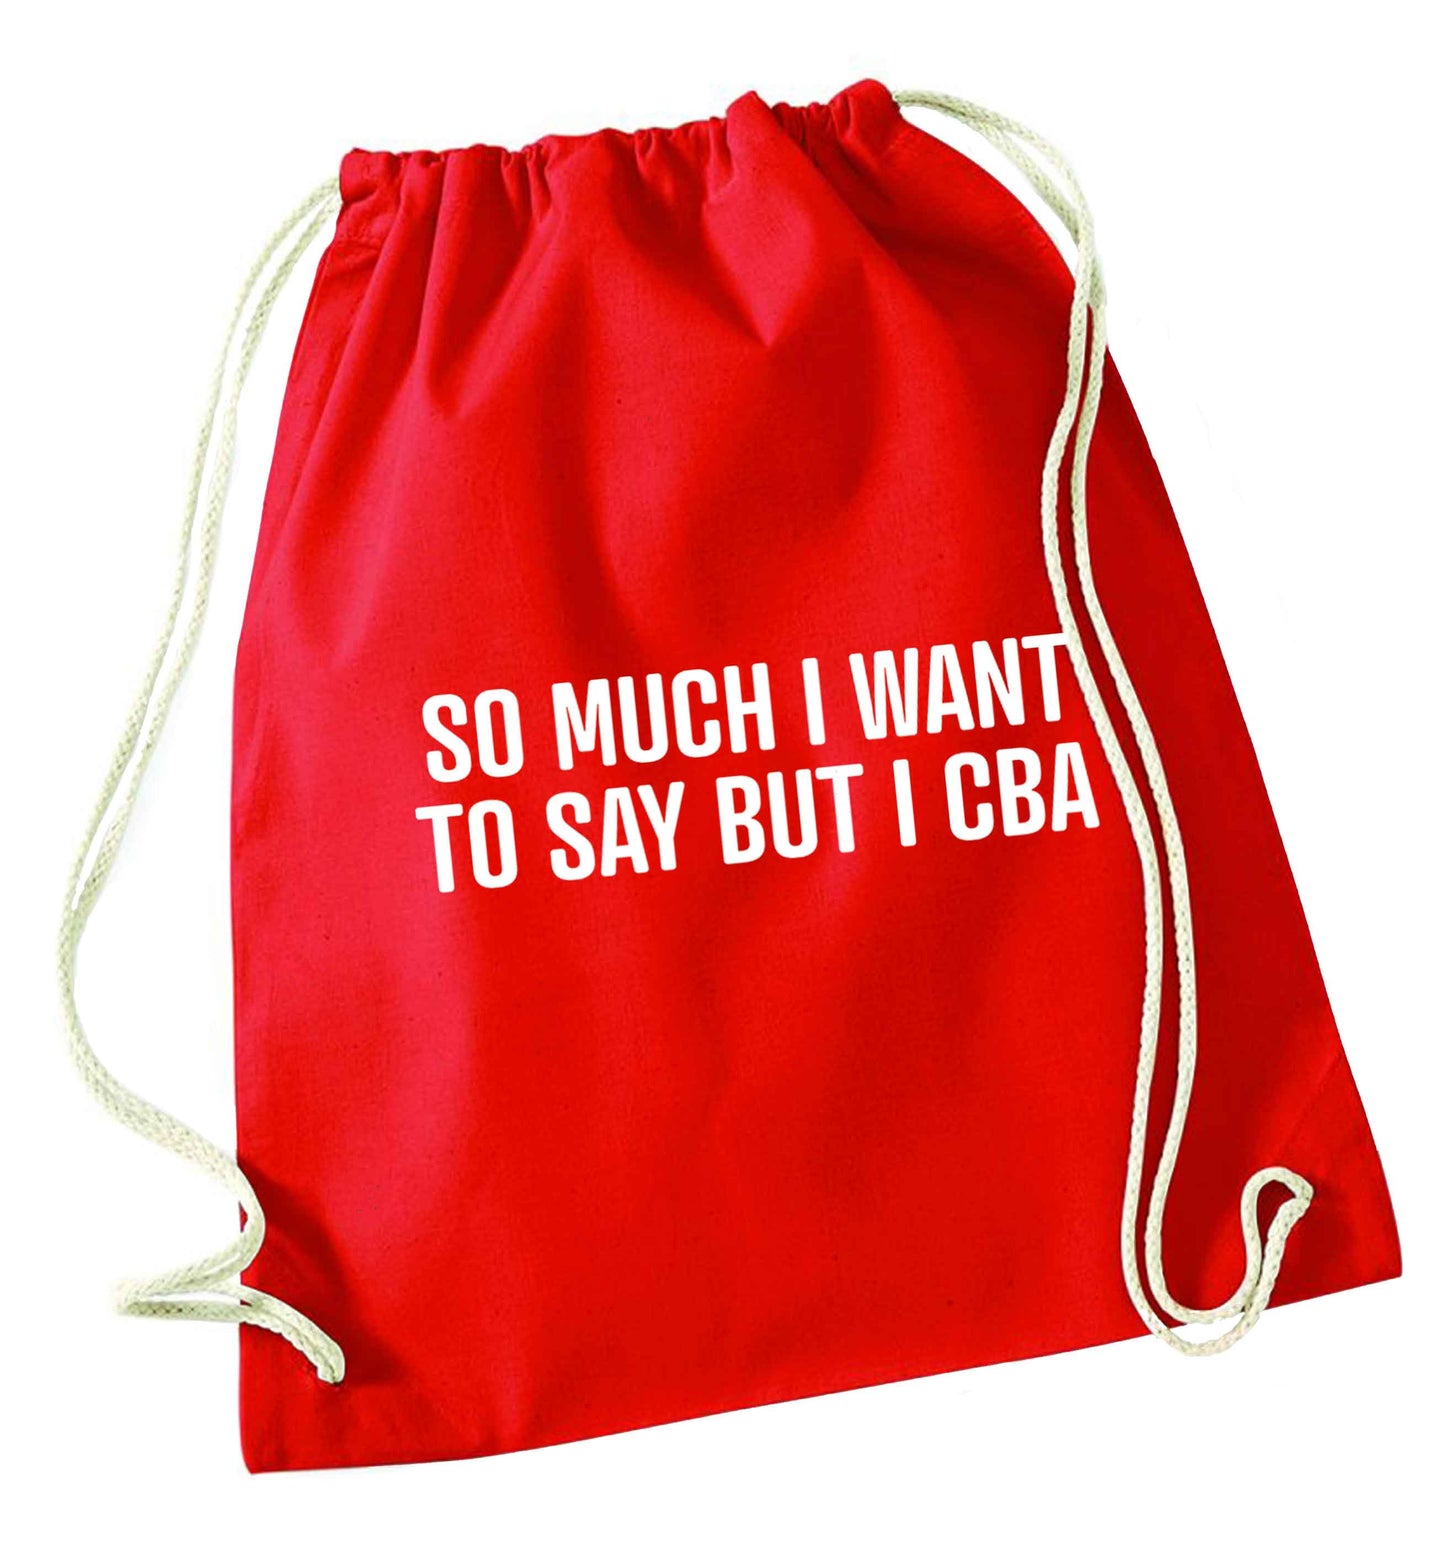 So much I want to say I cba  red drawstring bag 